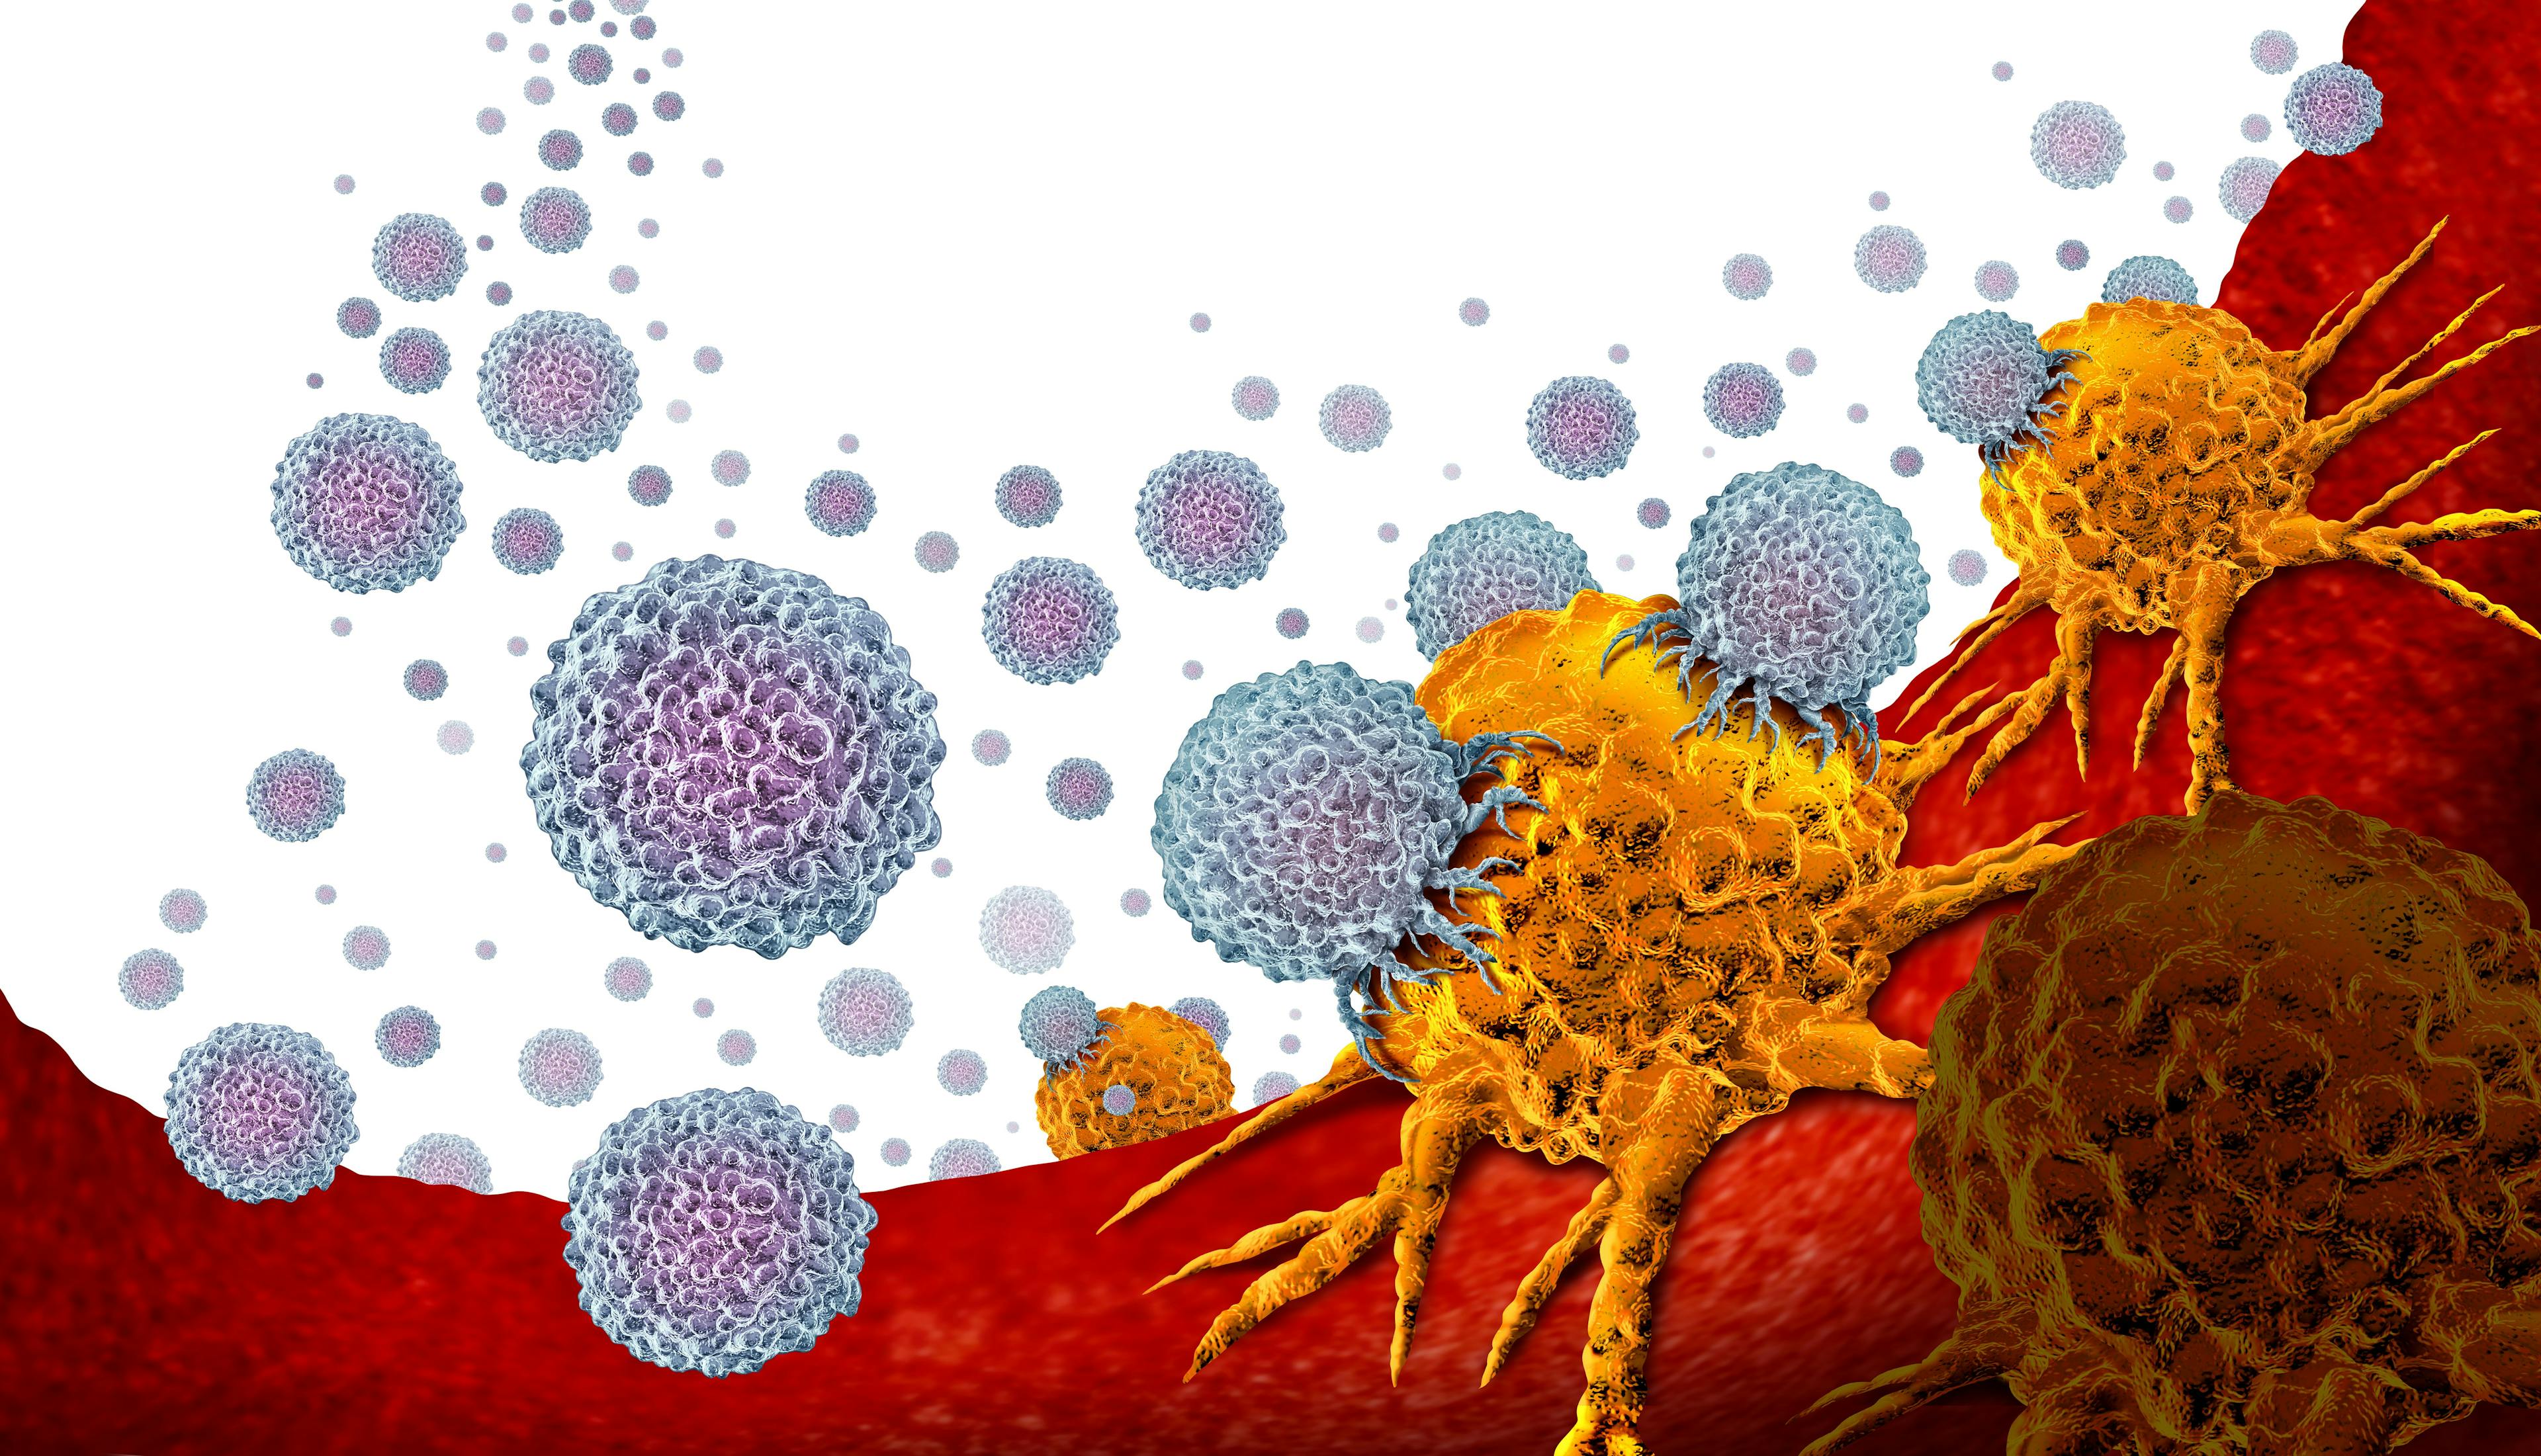 CAR T-Cell Therapy Plus Amplifying Vaccine Shows Initial Safety, Efficacy in Solid Tumors 